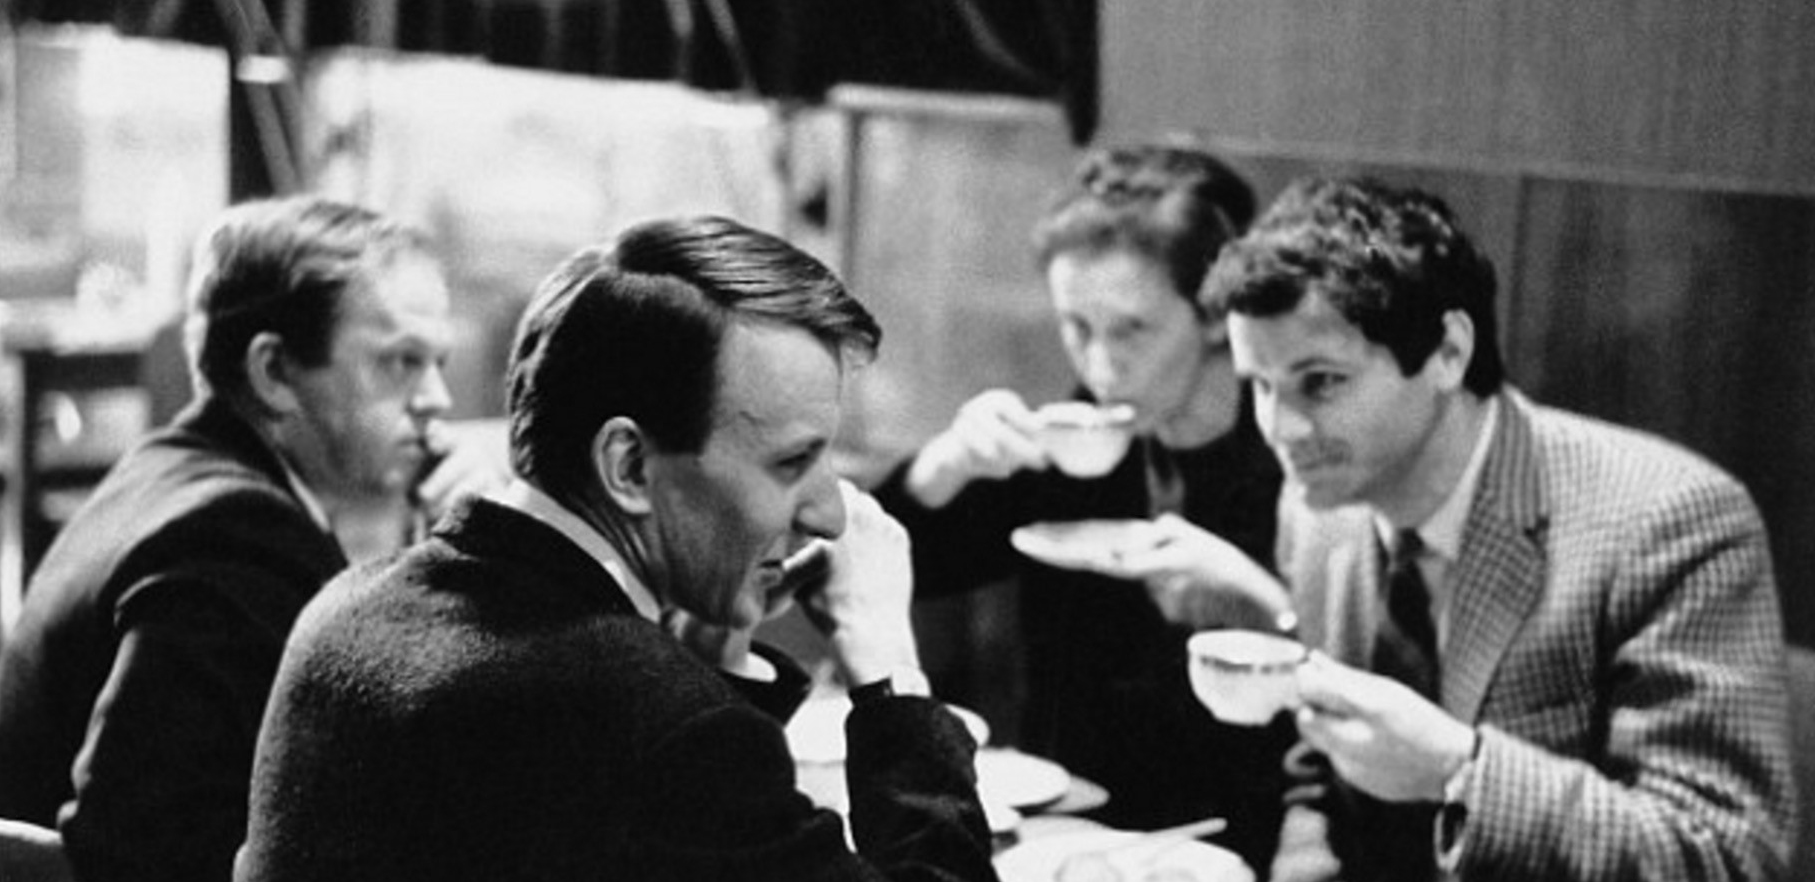 A 1965 photo of Malcolm Williamson, Richard Rodney Bennett, Thea Musgrave, and Peter Maxwell Davies at a cafe; Musgrave and Maxwell Davies are drinking from teacups.